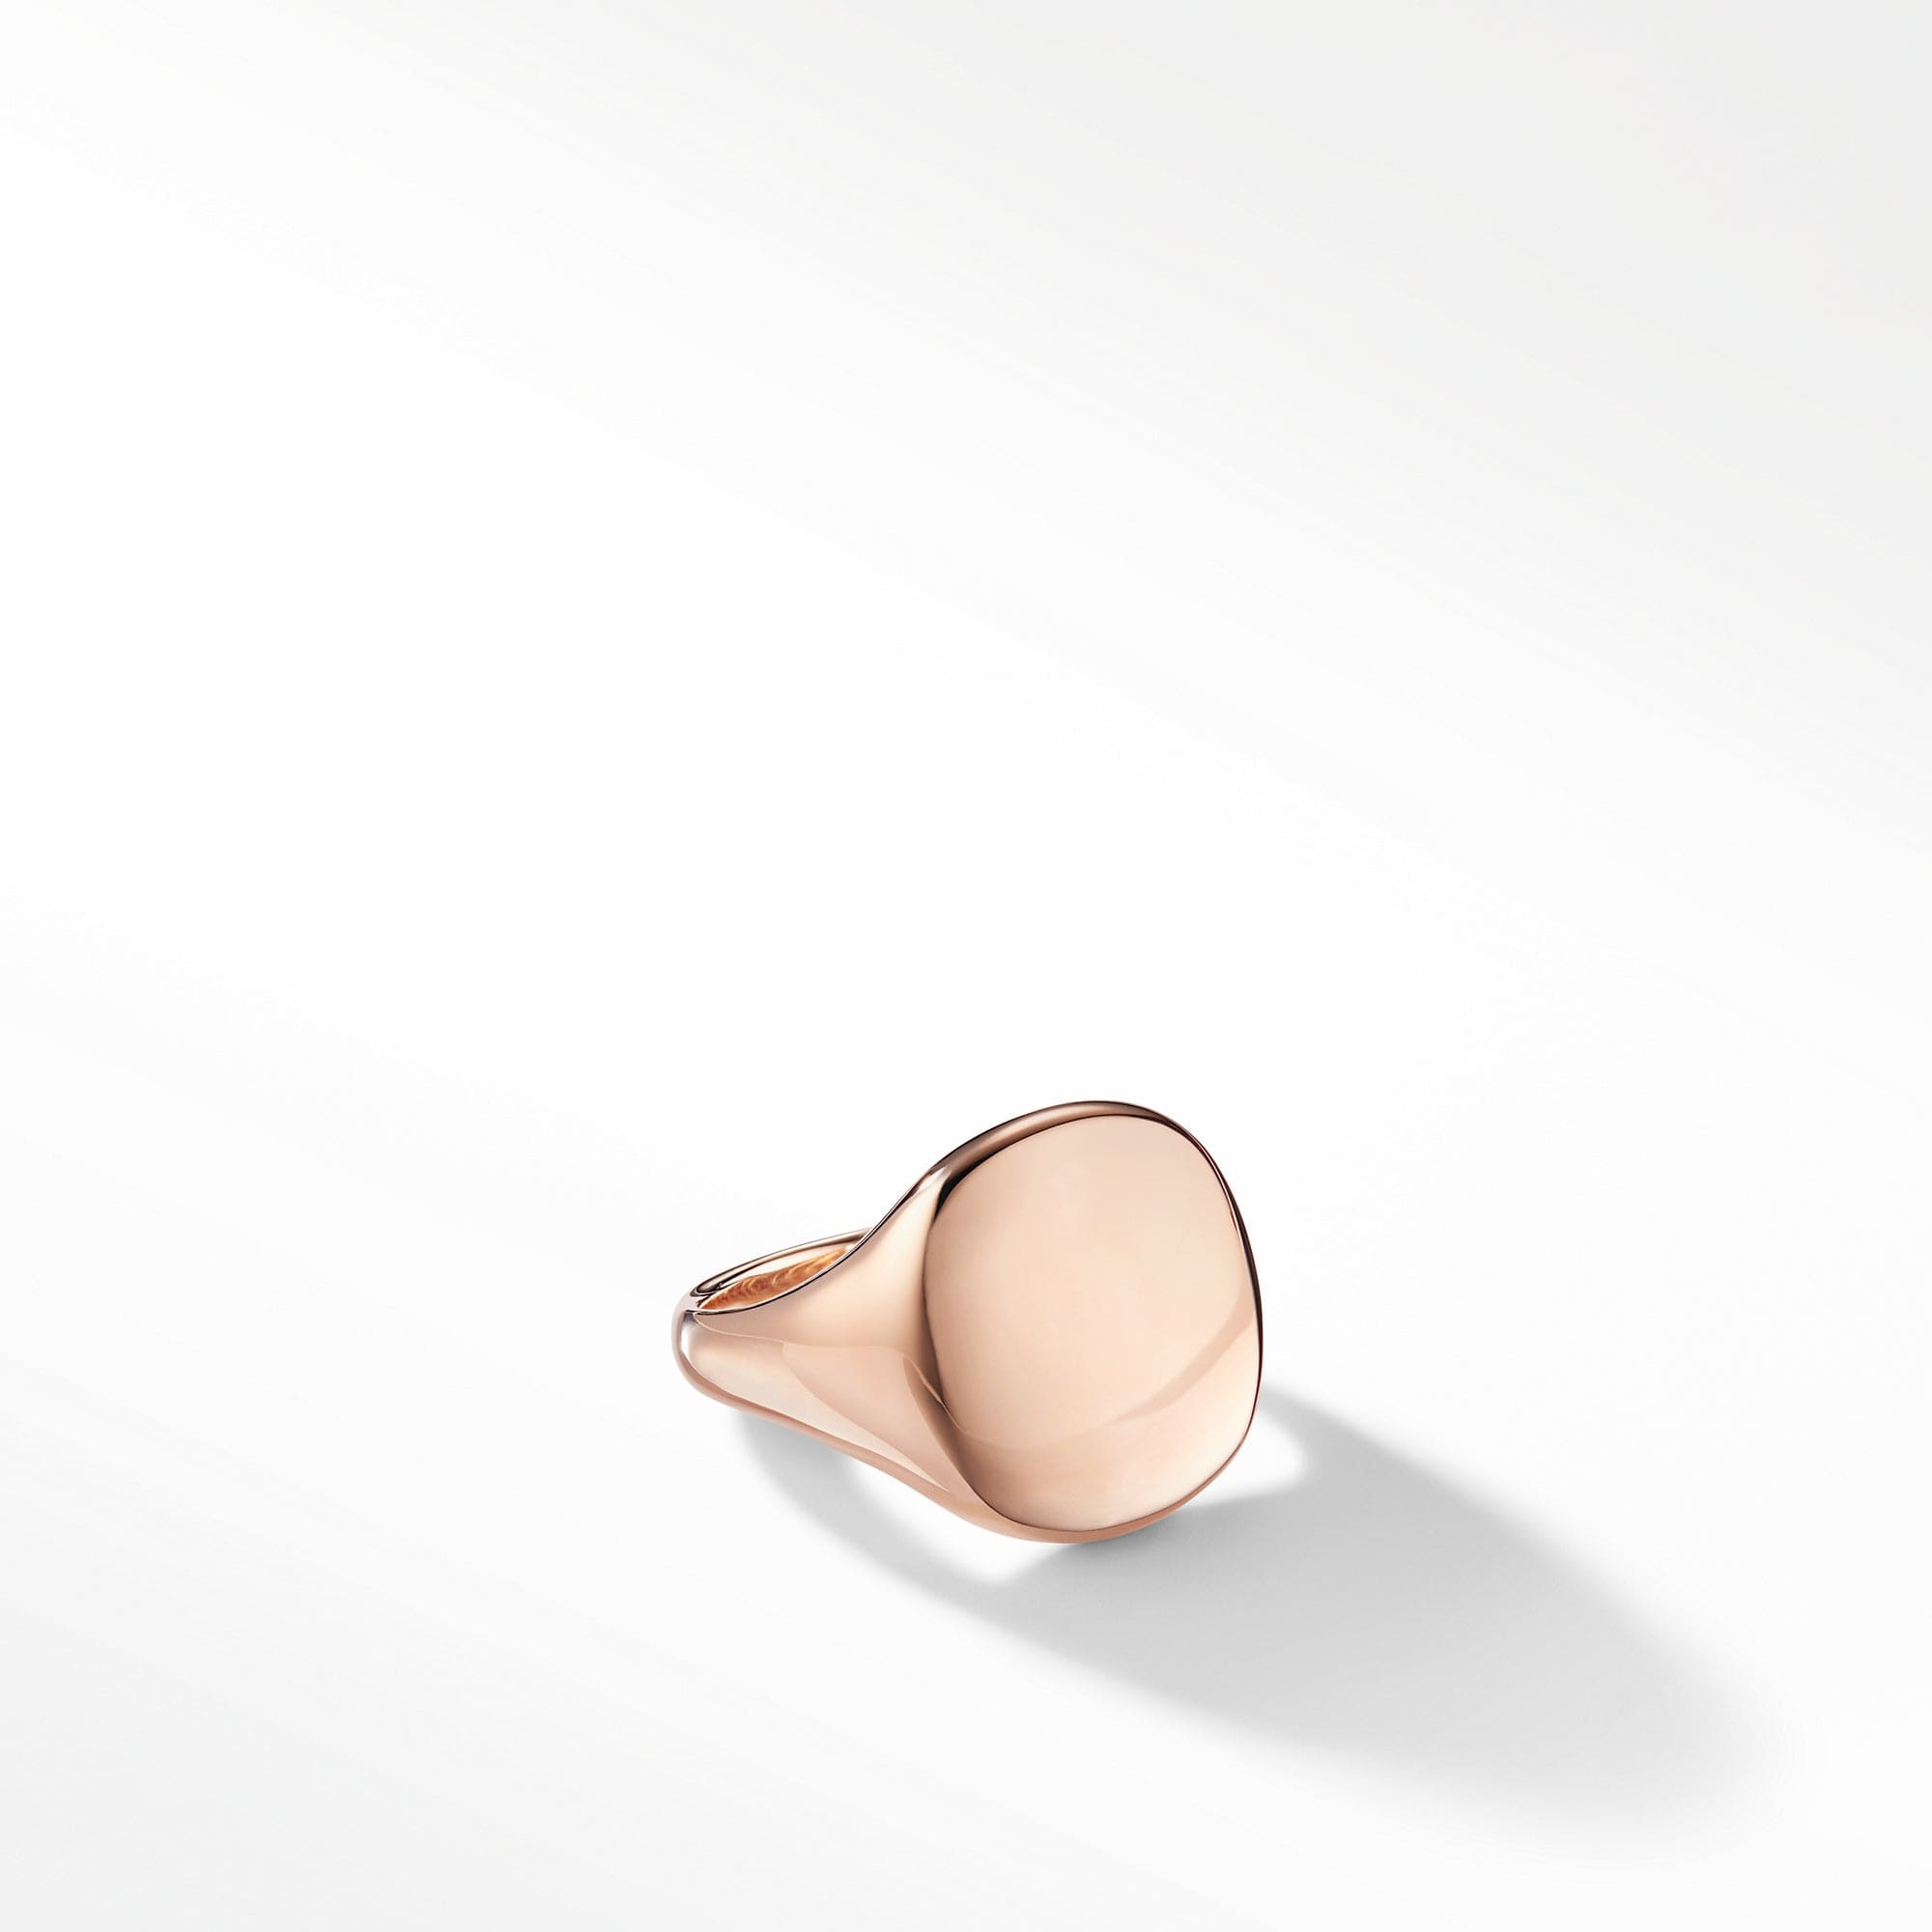 Pinky Ring in Rose Gold, Long's Jewelers